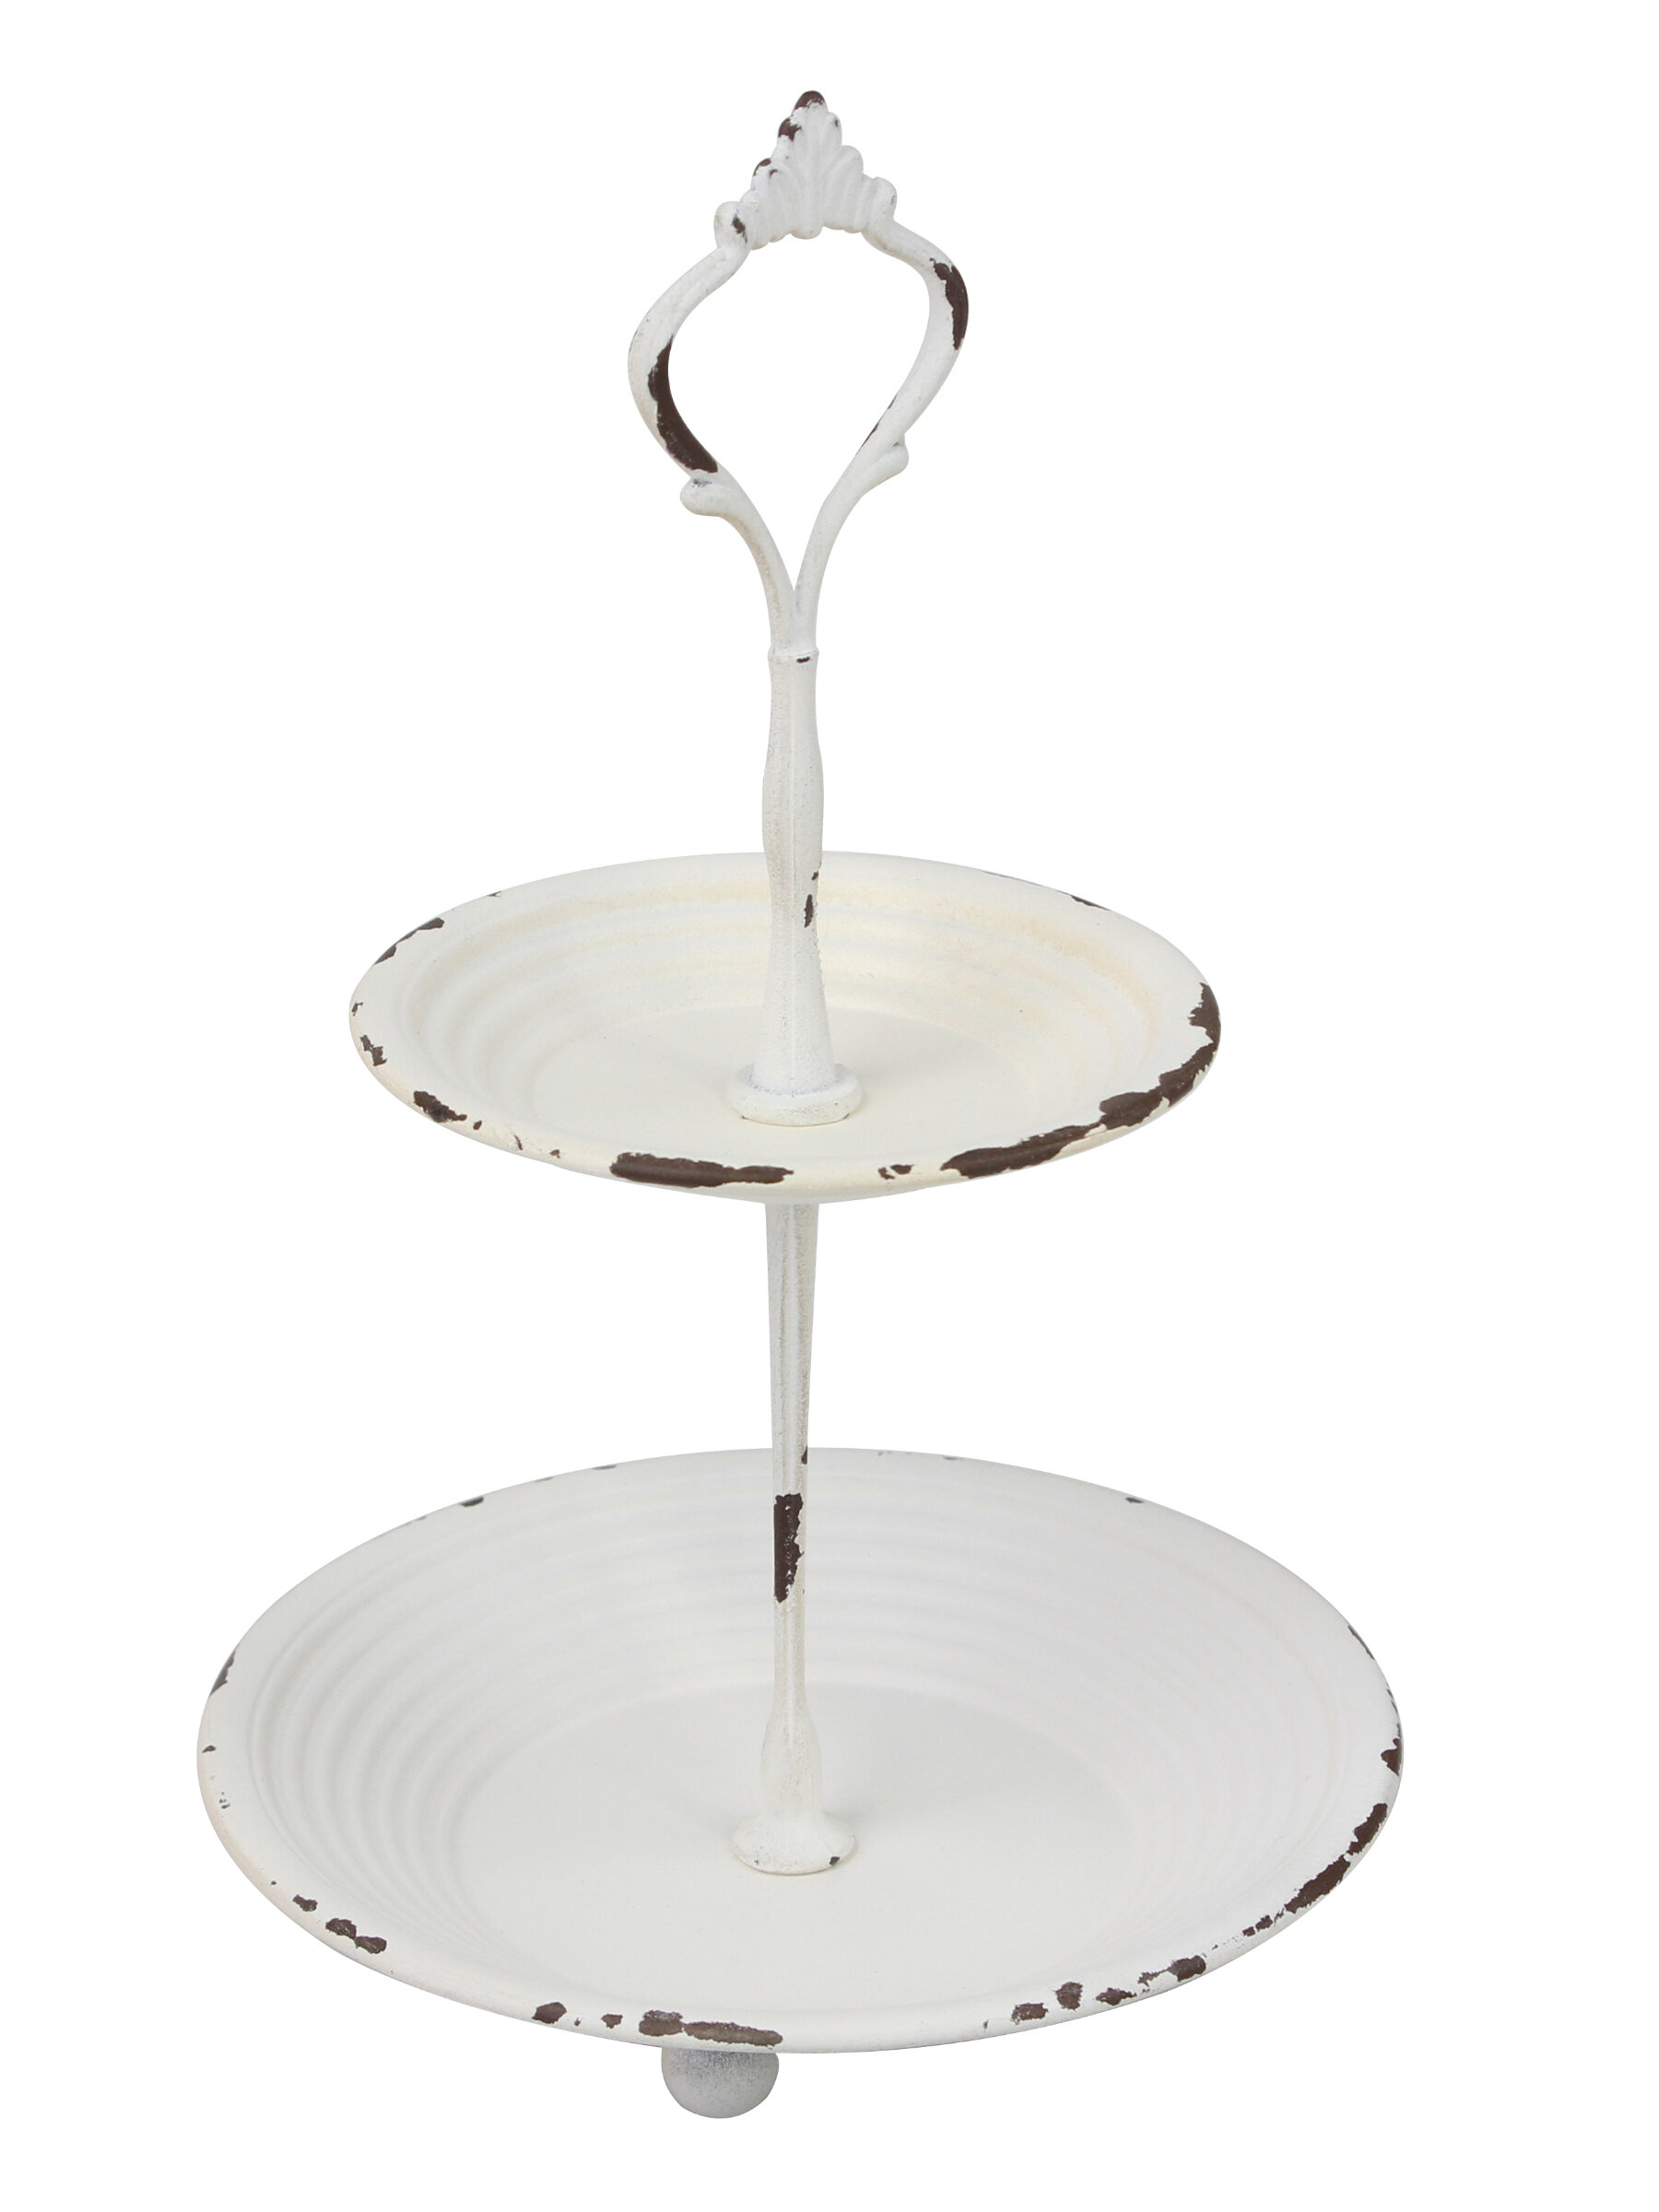 2 Tier White Decorative Metal Tray,Round Tier Tray,Housewarning Gift 